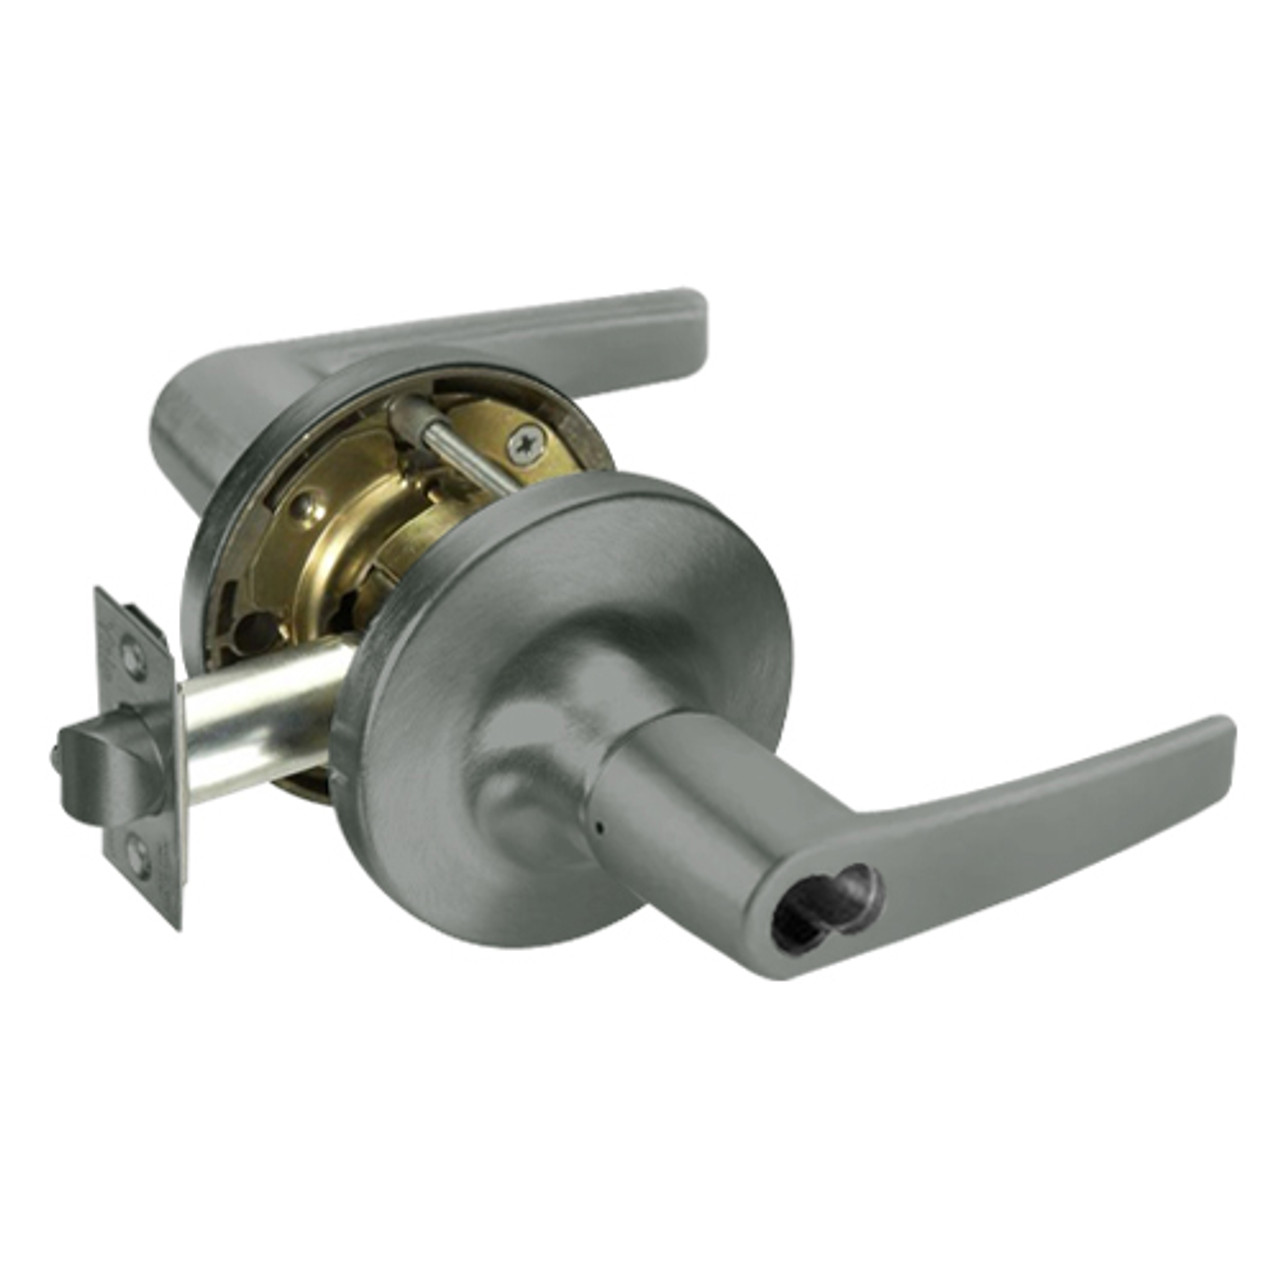 SI-MO5404LN-620 Yale 5400LN Series Single Cylinder Entry Cylindrical Locks with Monroe Lever Prepped for Schlage IC Core in Antique Nickel